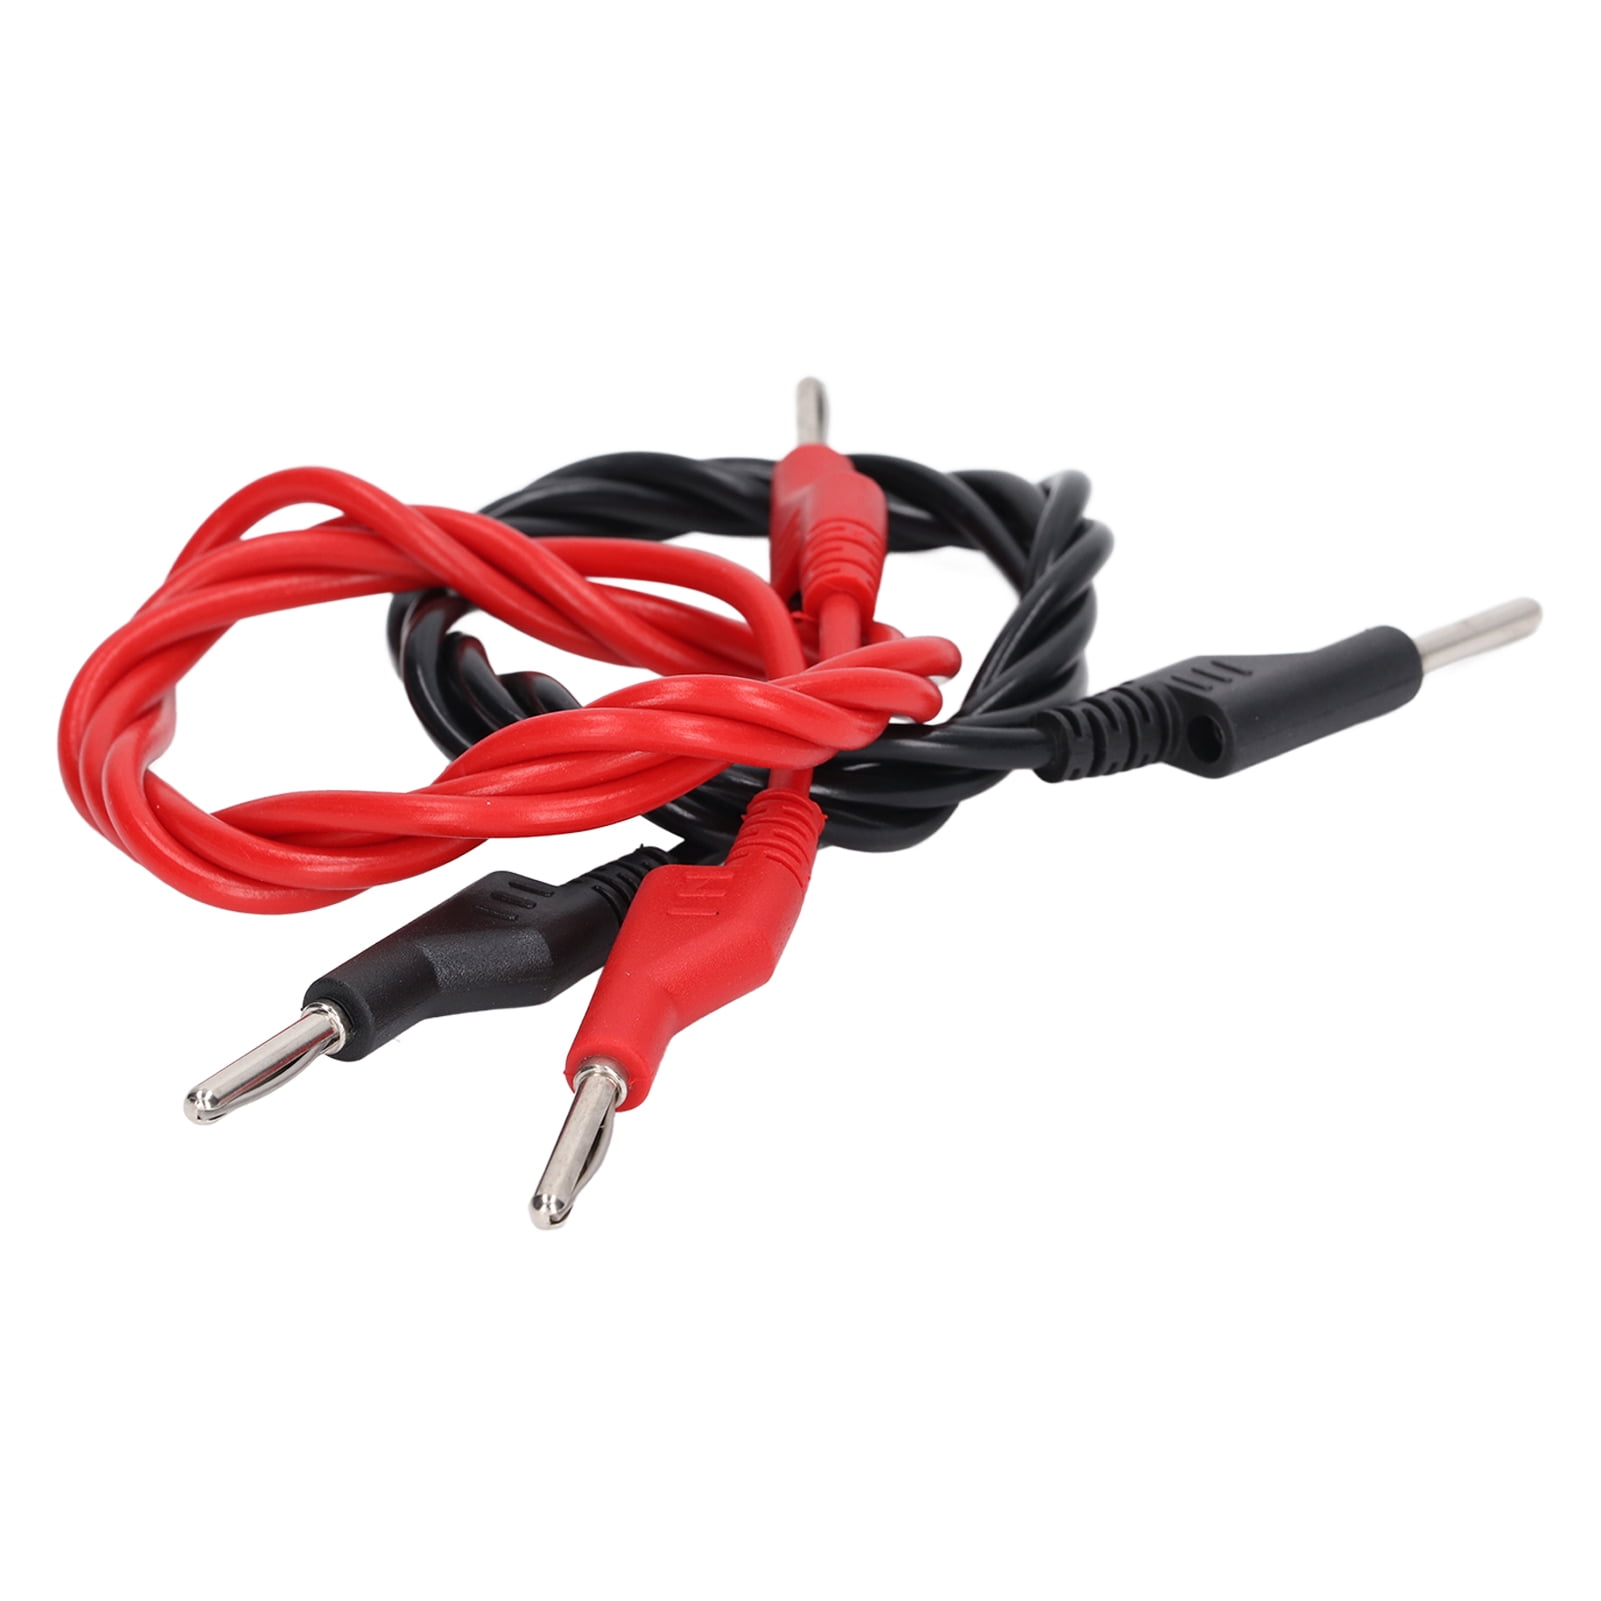 4mm Banana Plug Leads Alligator Clip Connector Silicone Cables High Voltage Test 